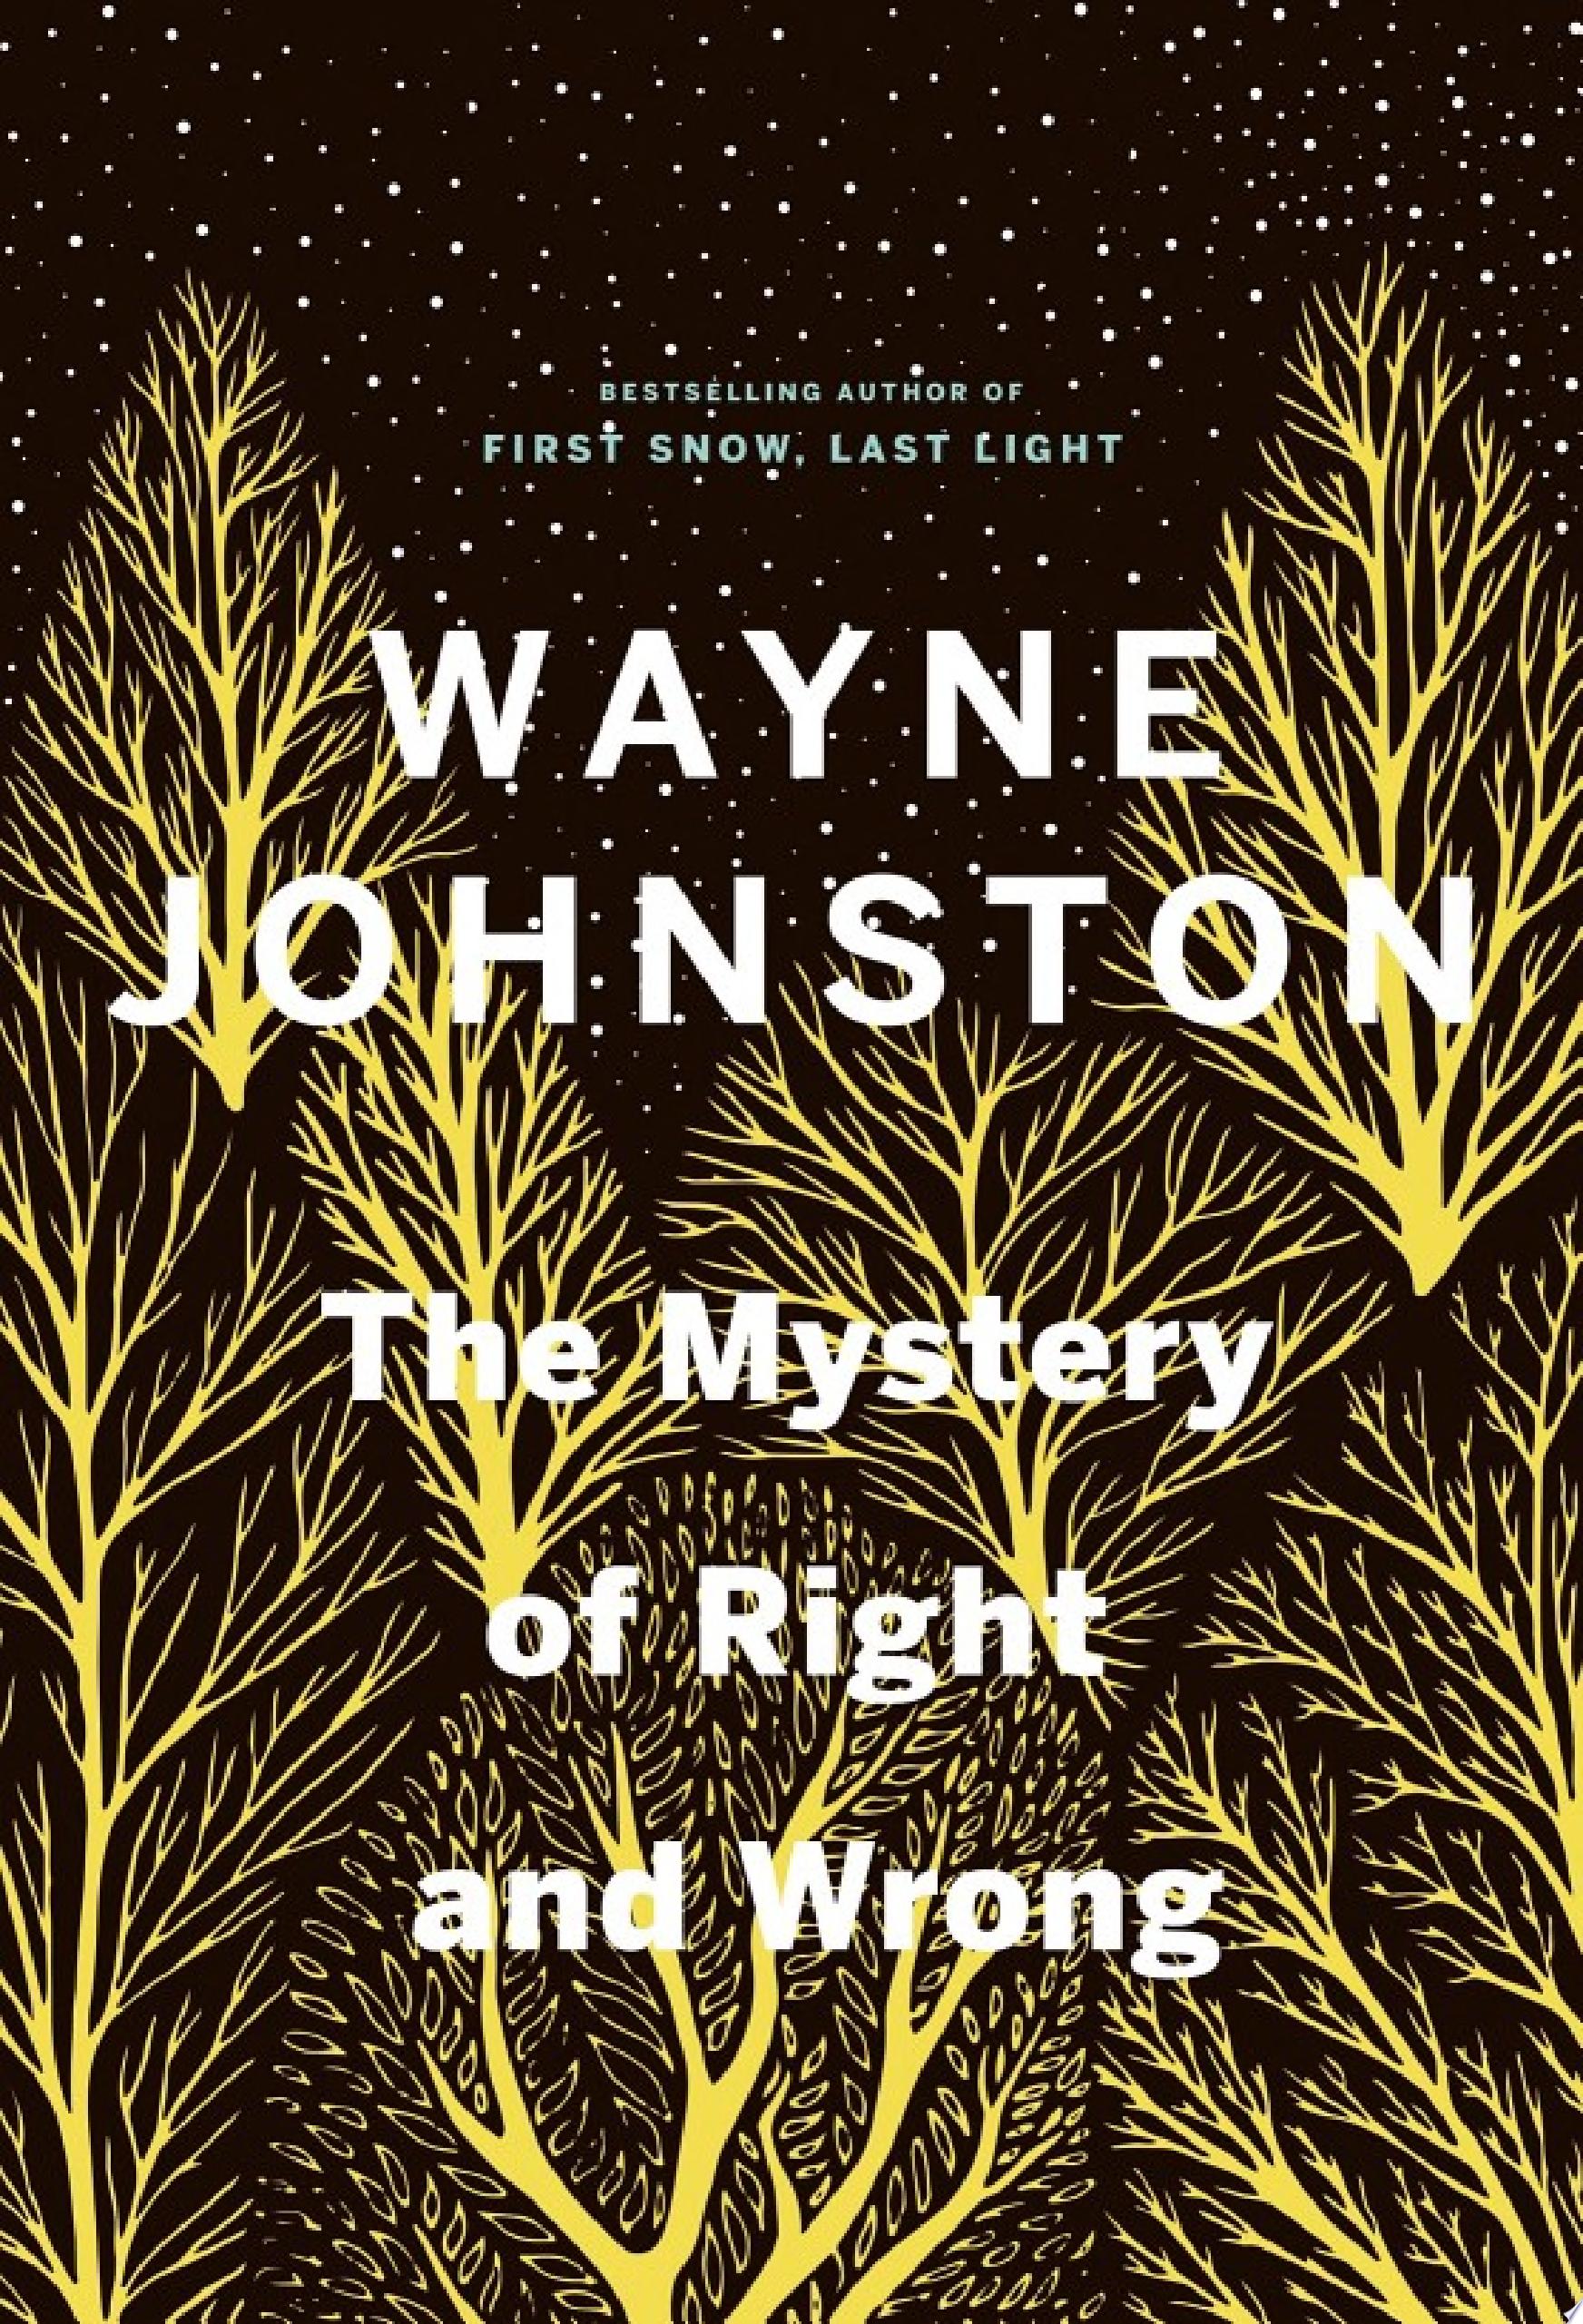 Image for "The Mystery of Right and Wrong"